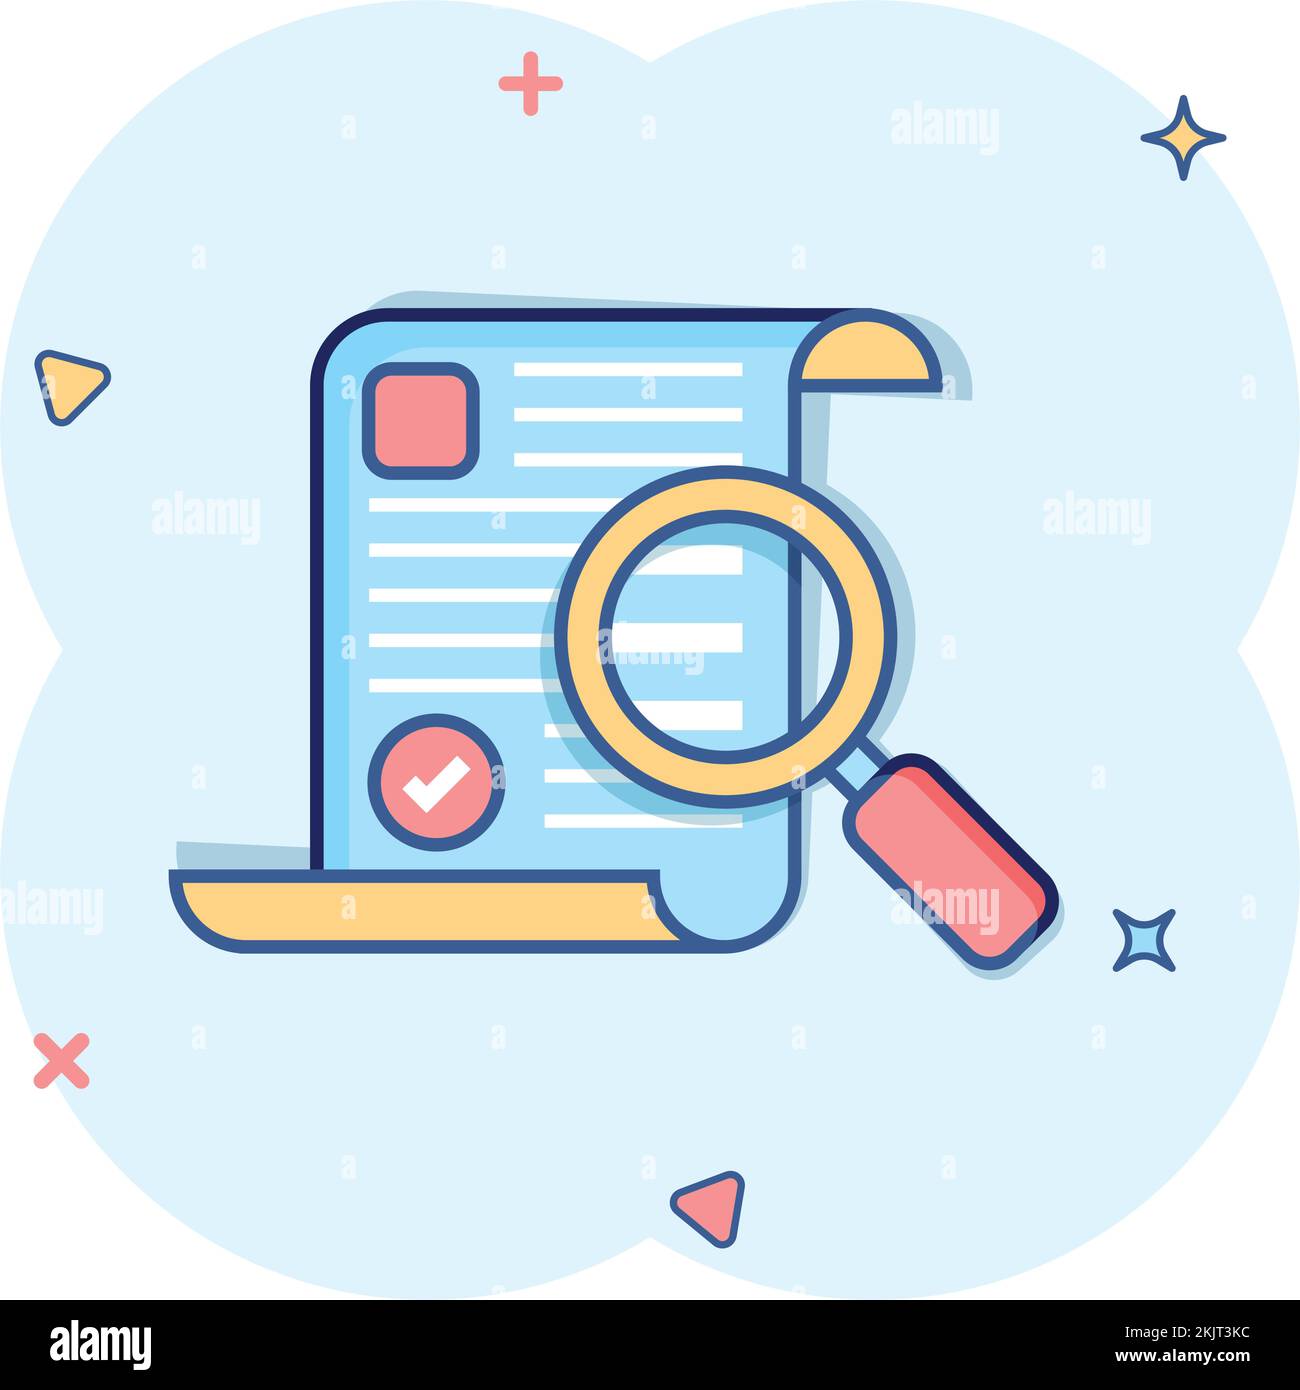 Magnifying glass with document icon in comic style. Report approval cartoon vector illustration on isolated background. Paper sheet sign business conc Stock Vector